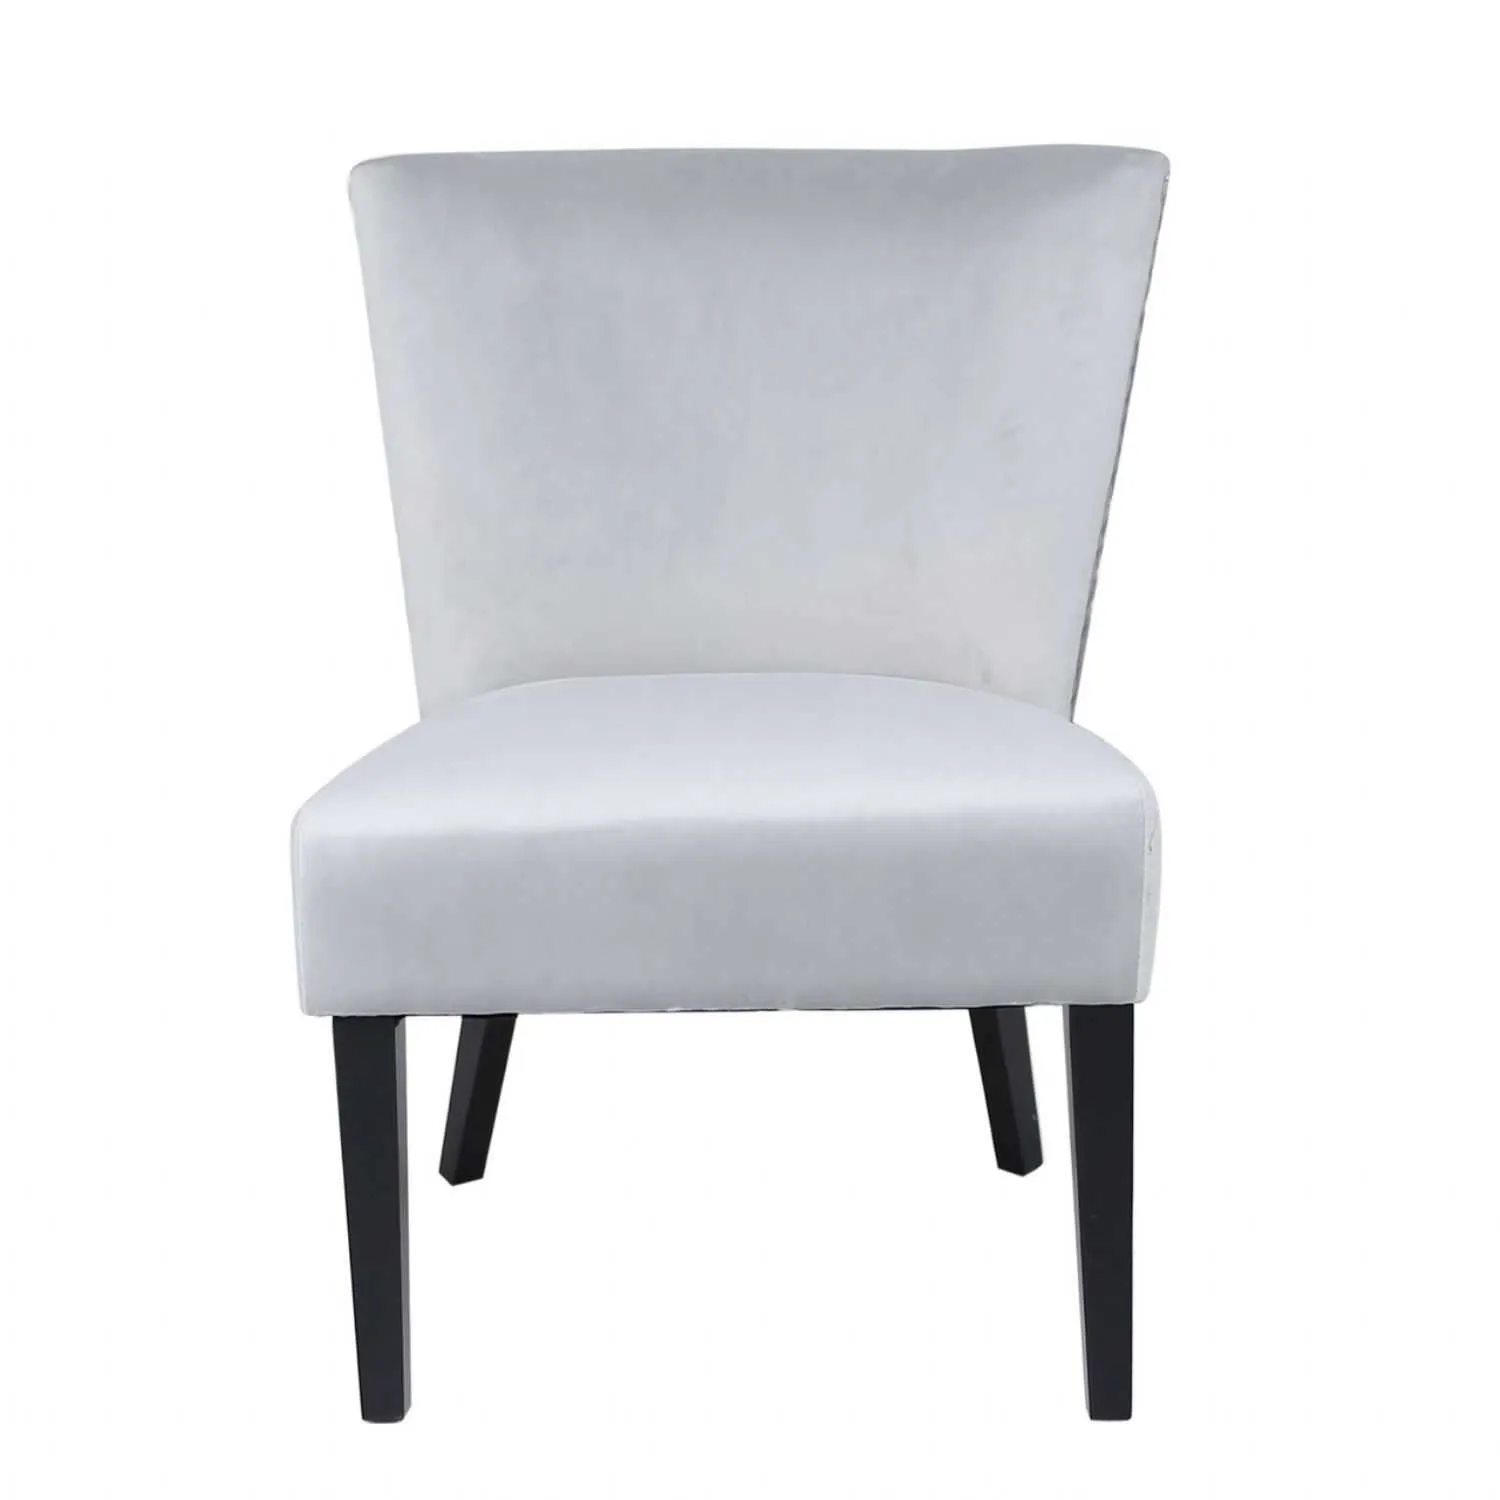 Grey Curved Back Chair